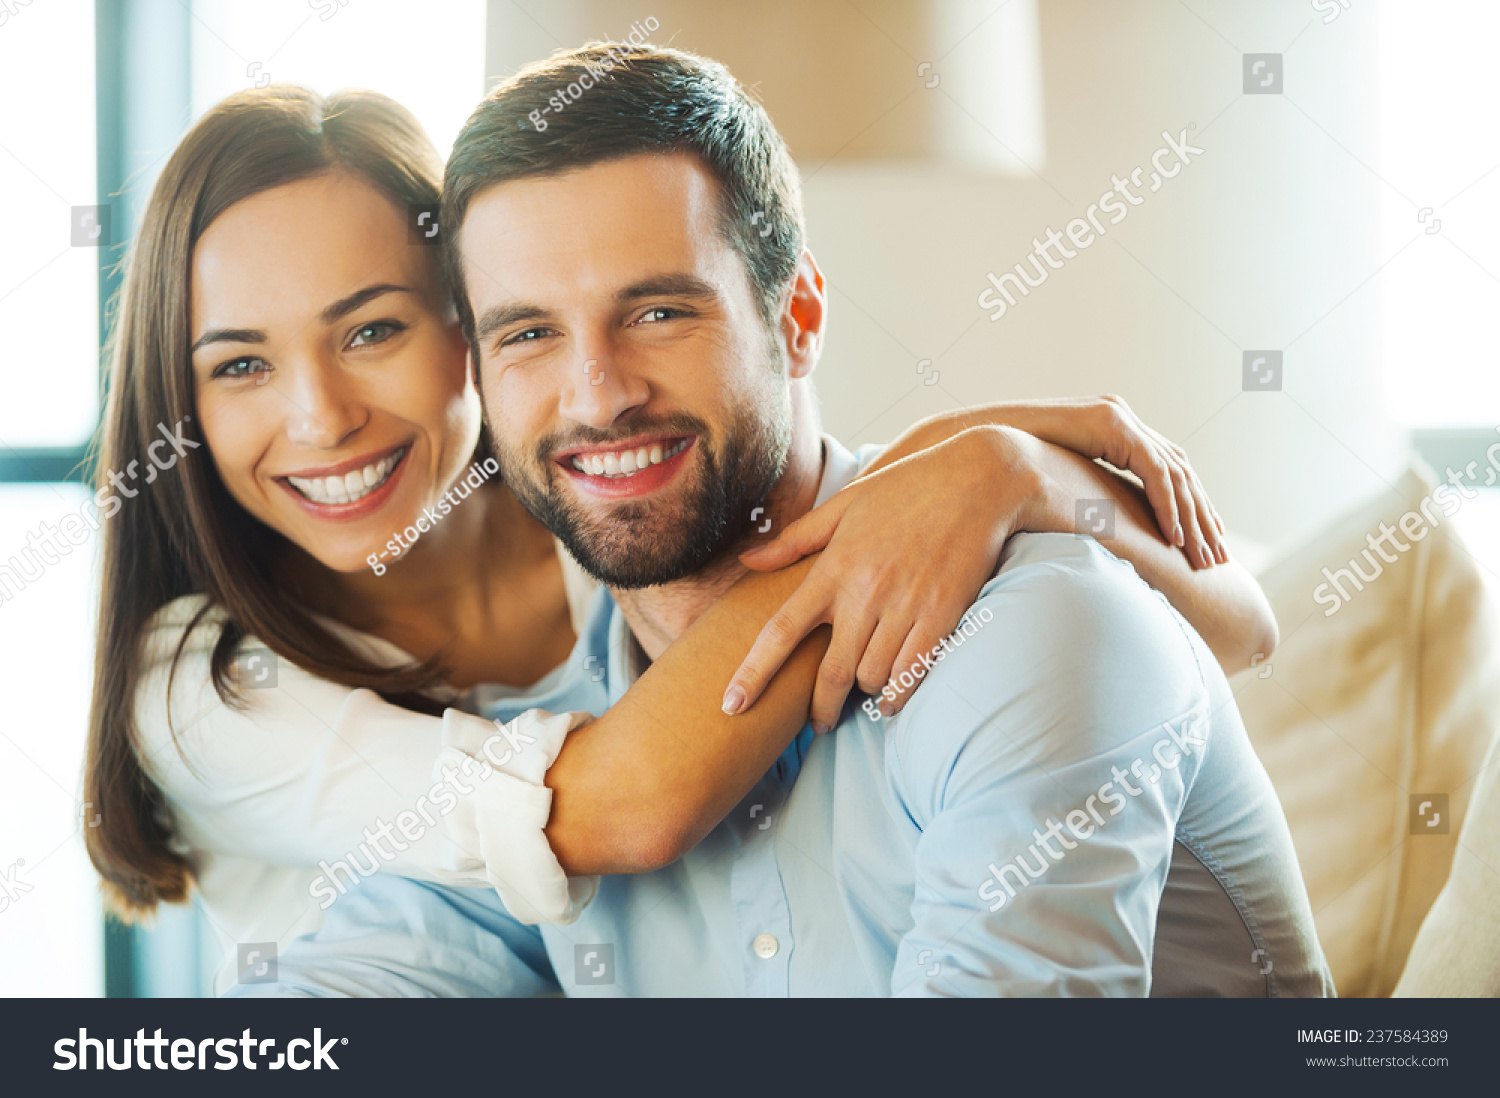 Enjoying every minute together. Beautiful young loving couple sitting together on the couch while woman embracing her boyfriend and smiling  #237584389